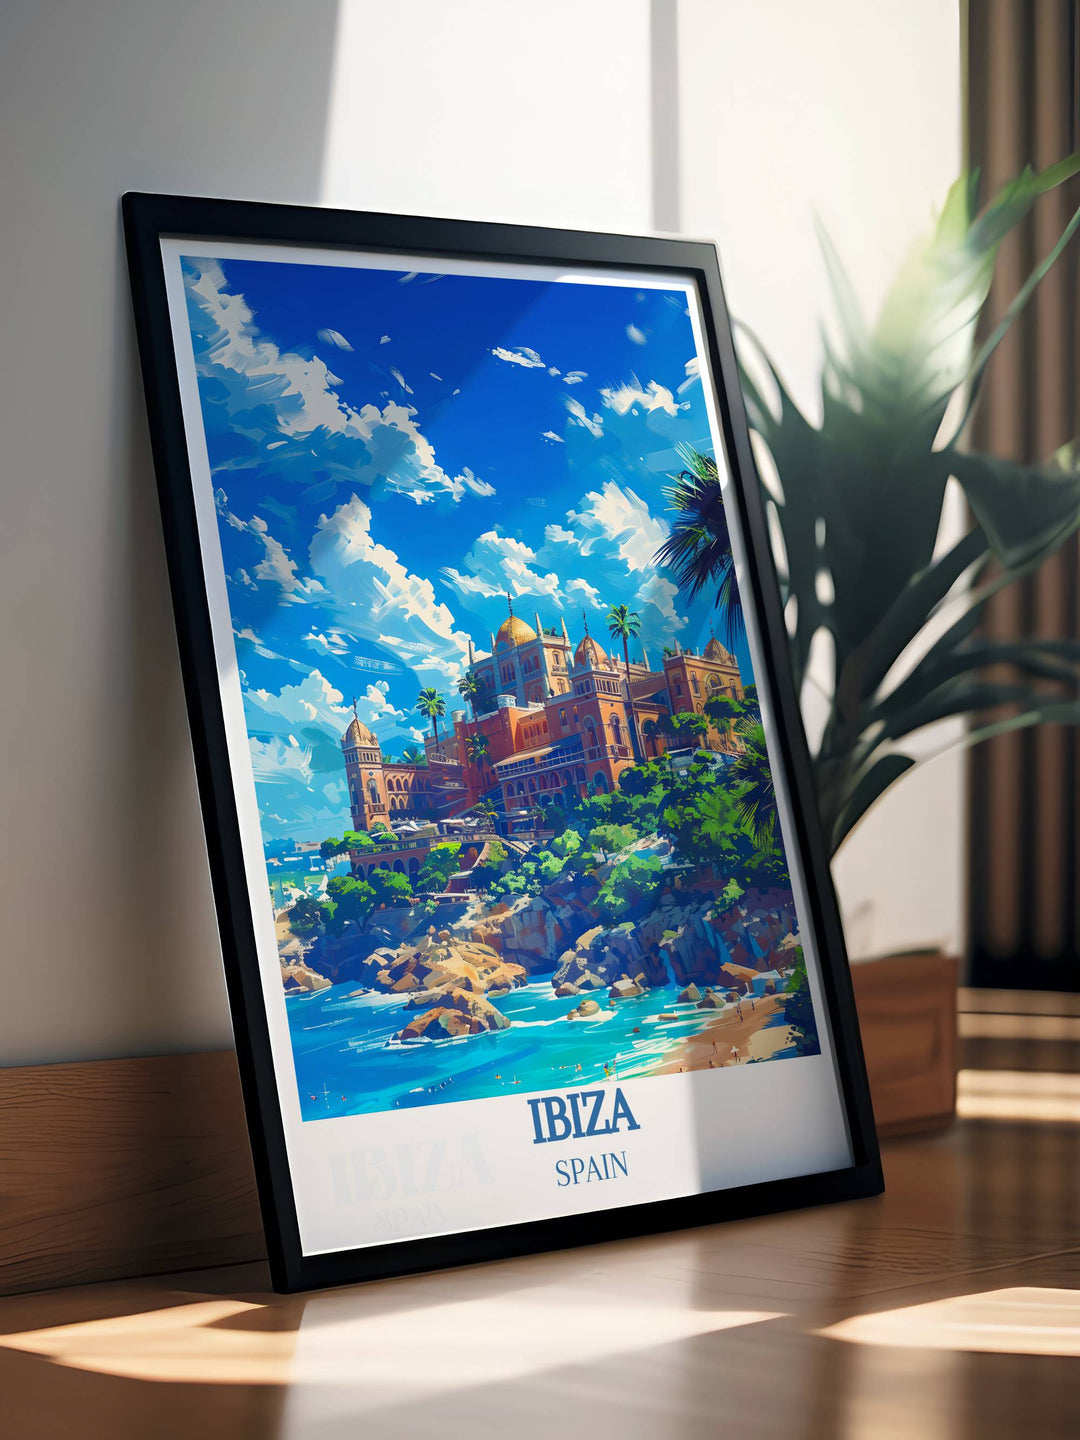 Ibiza Spain Print featuring the famous Ocean Beach Club and the tranquil Cala d Hort Beach capturing the dual essence of Ibiza's energetic club life and serene coastal beauty perfect for any room